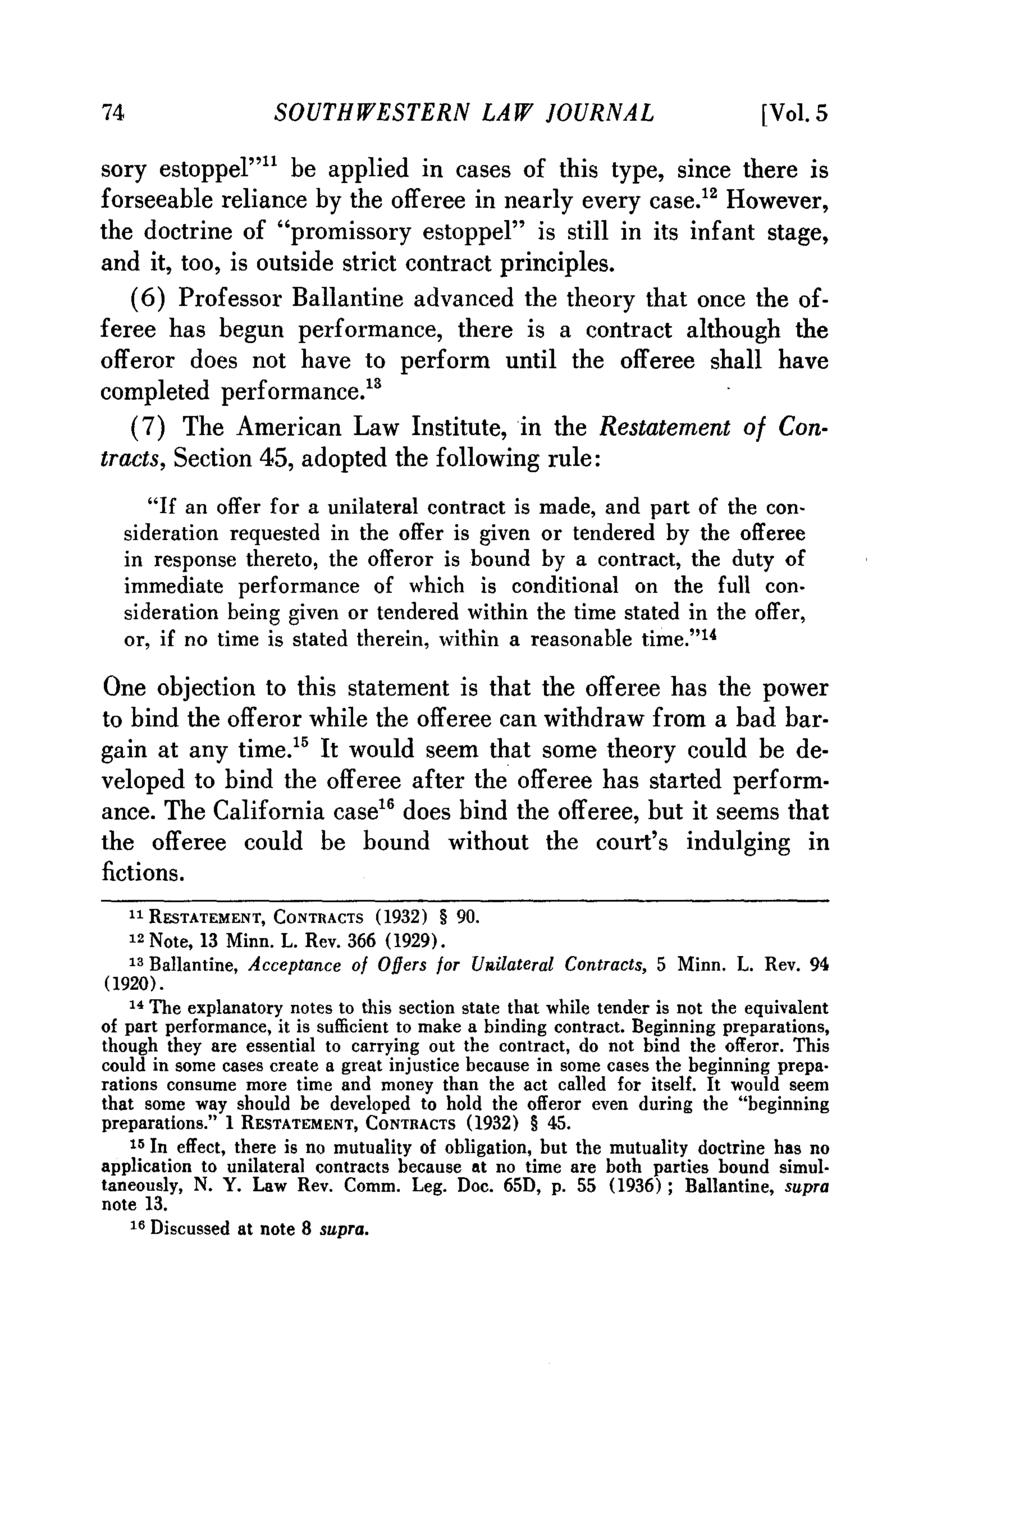 SOUTHWESTERN LAW JOURNAL [Vol. 5 sory estoppel"" be applied in cases of this type, since there is forseeable reliance by the offeree in nearly every case.